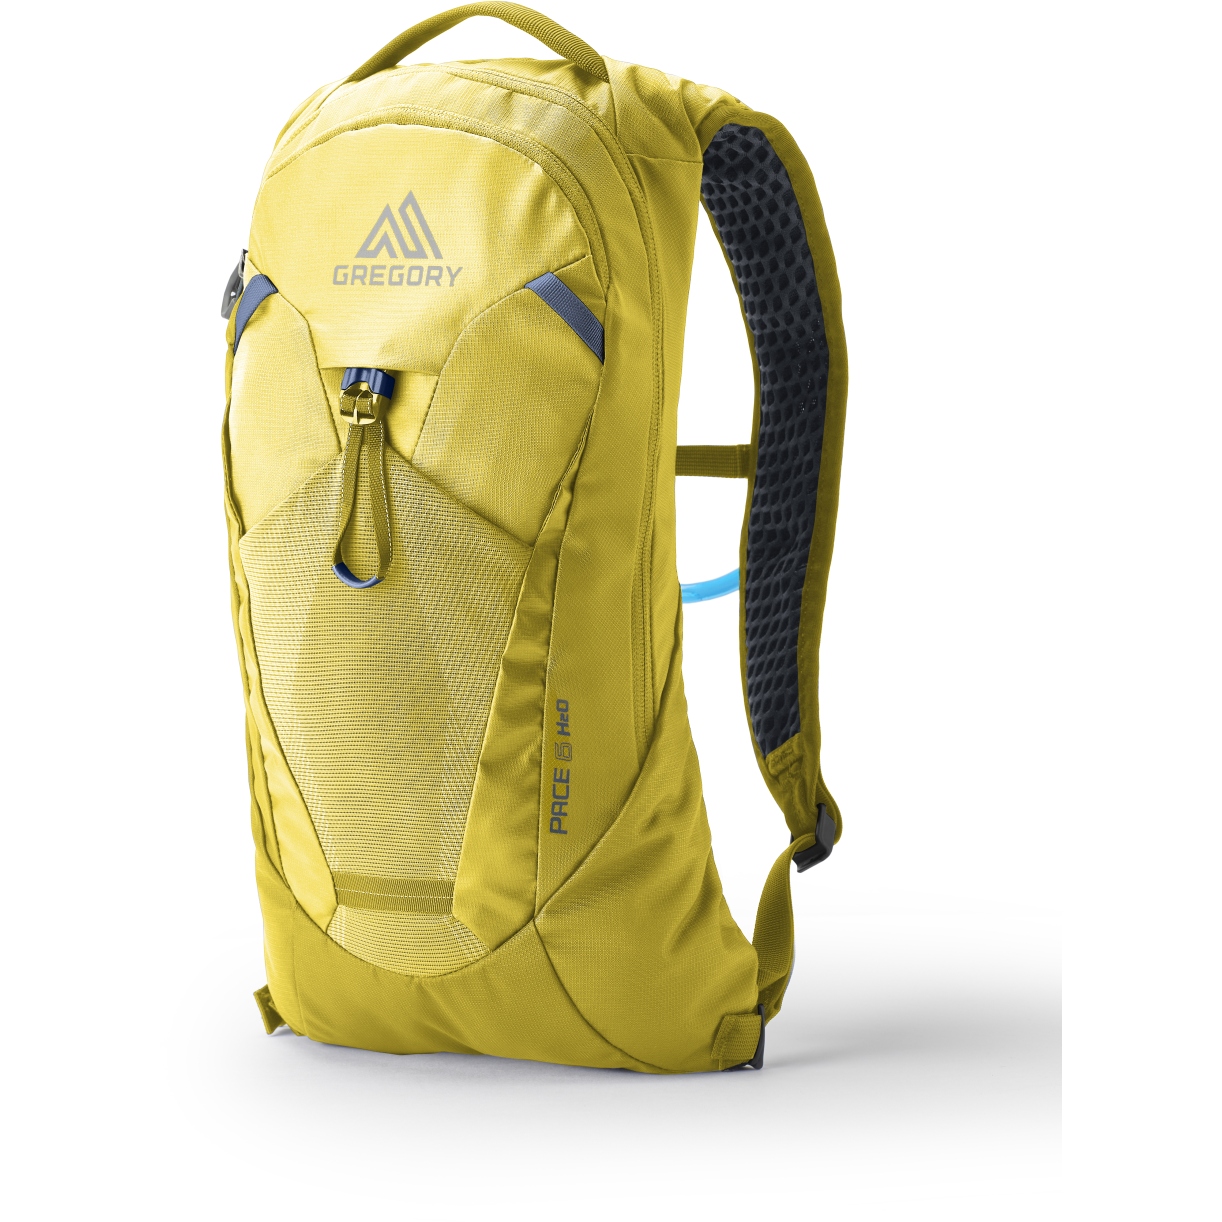 Image of Gregory Pace 6 H2O Women's Backpack - Mineral Yellow